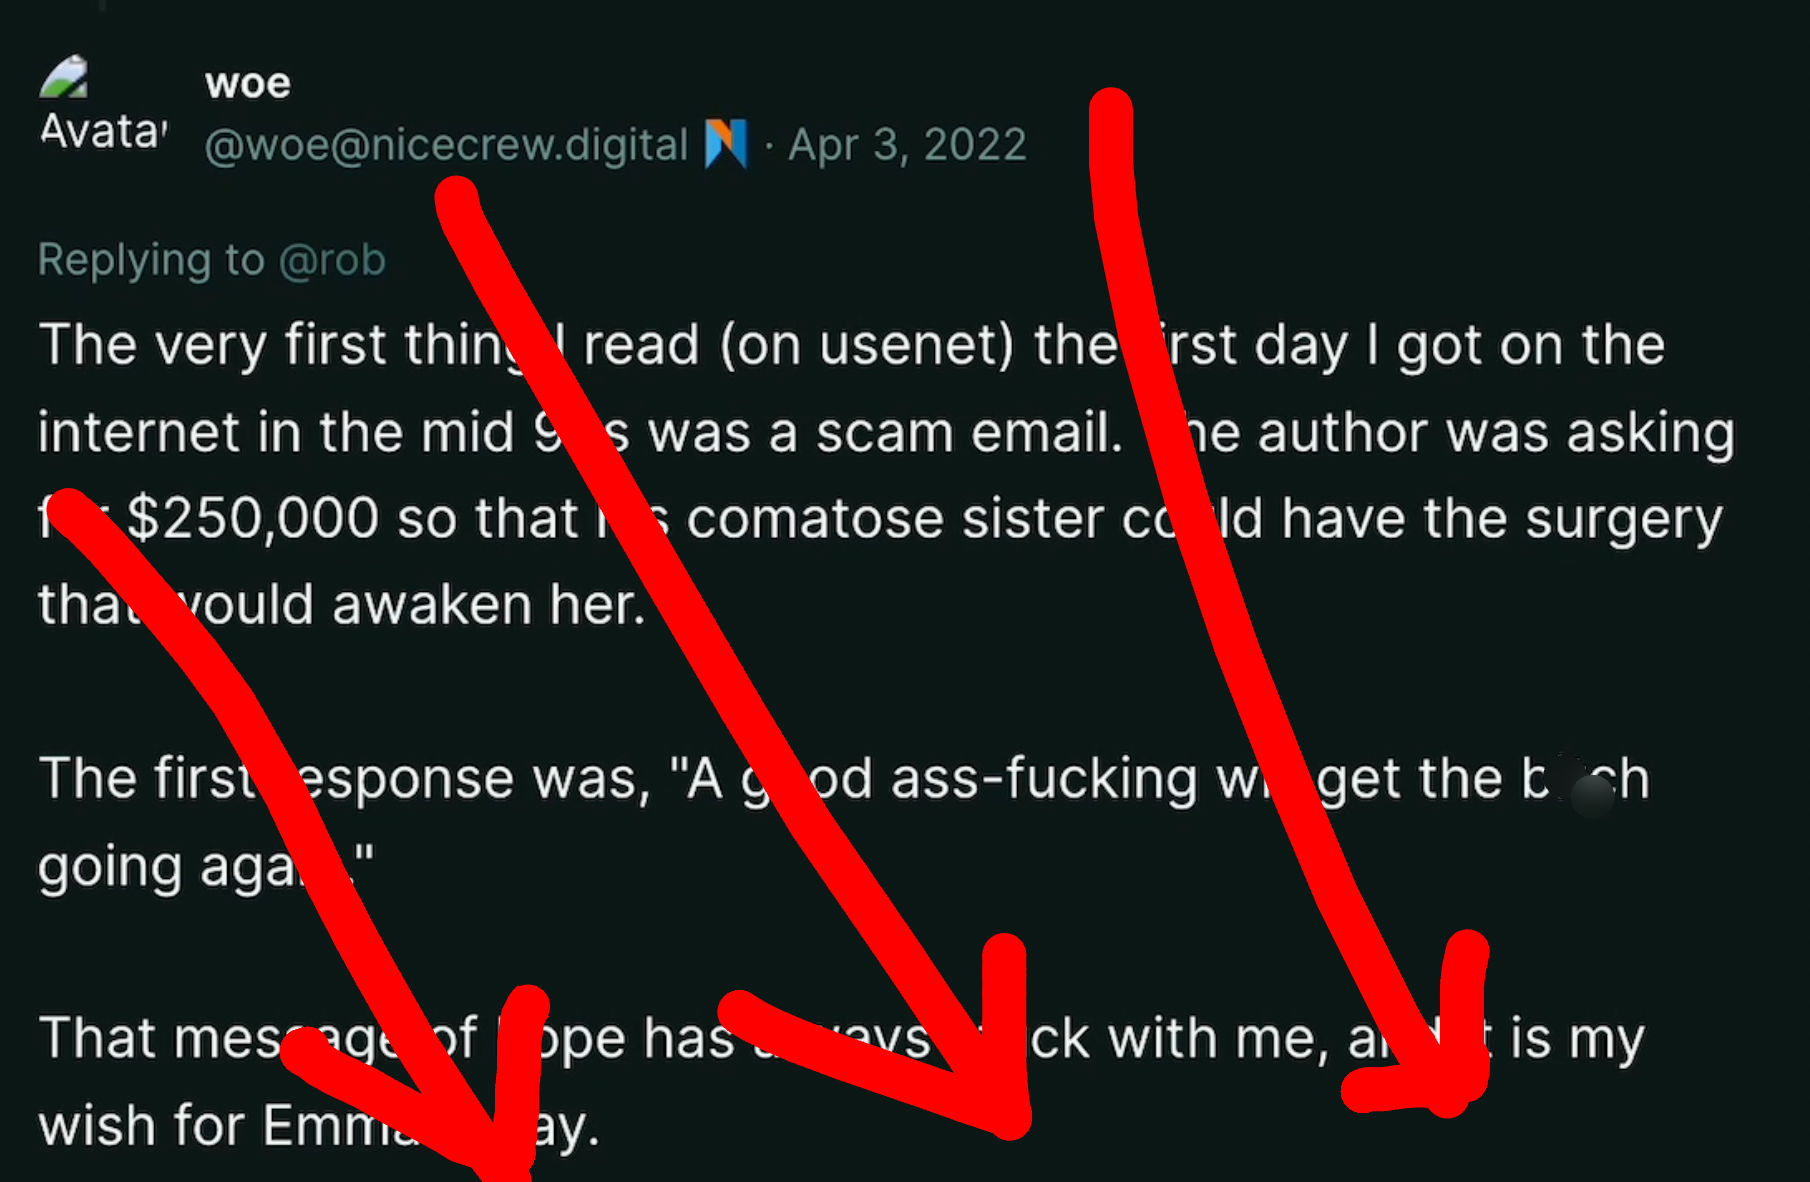 Dumperth on Poast: "The very first thing I read (on usenet) the first day I got on the internet in the mid 90s was a scam email. The author was asking for $250,000 so that his comatose sister could have the surgery that would awaken her. The first response was, 'A good ass-fucking will get the b*tch going again.' That message of hope has always stuck with me, and it is my wish for Emma today."